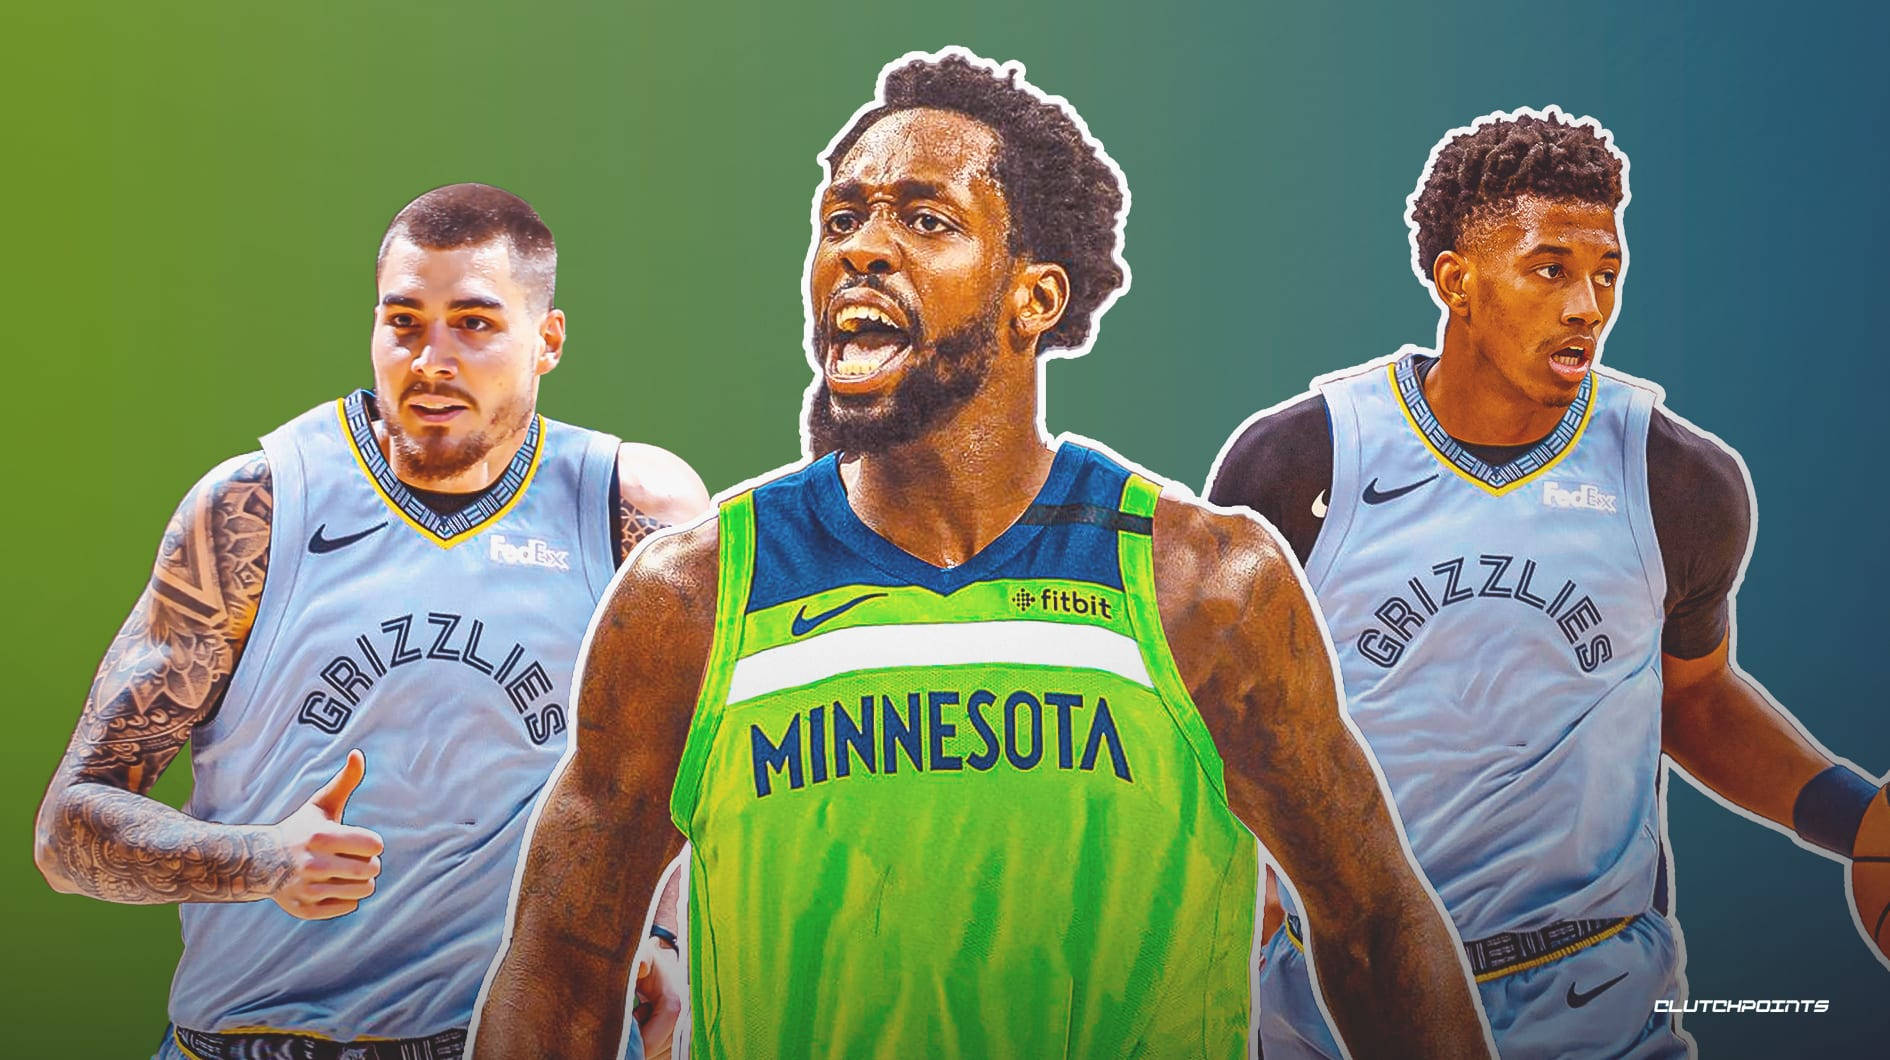 Patrick Beverley Dominating the Court in Neon Green Jersey Wallpaper